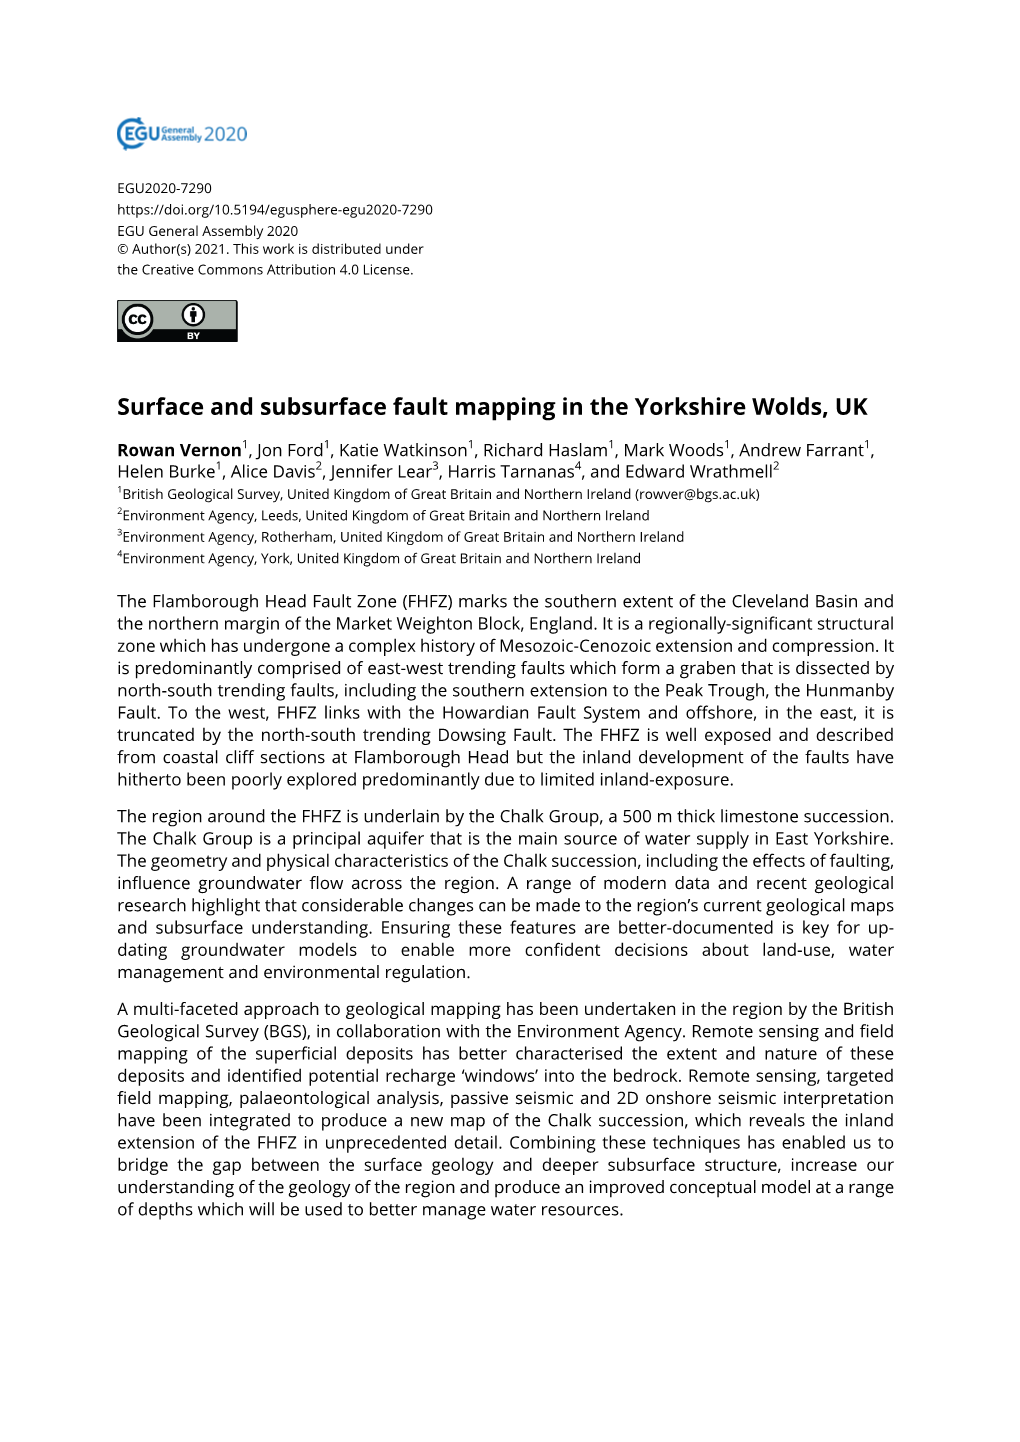 Surface and Subsurface Fault Mapping in the Yorkshire Wolds, UK